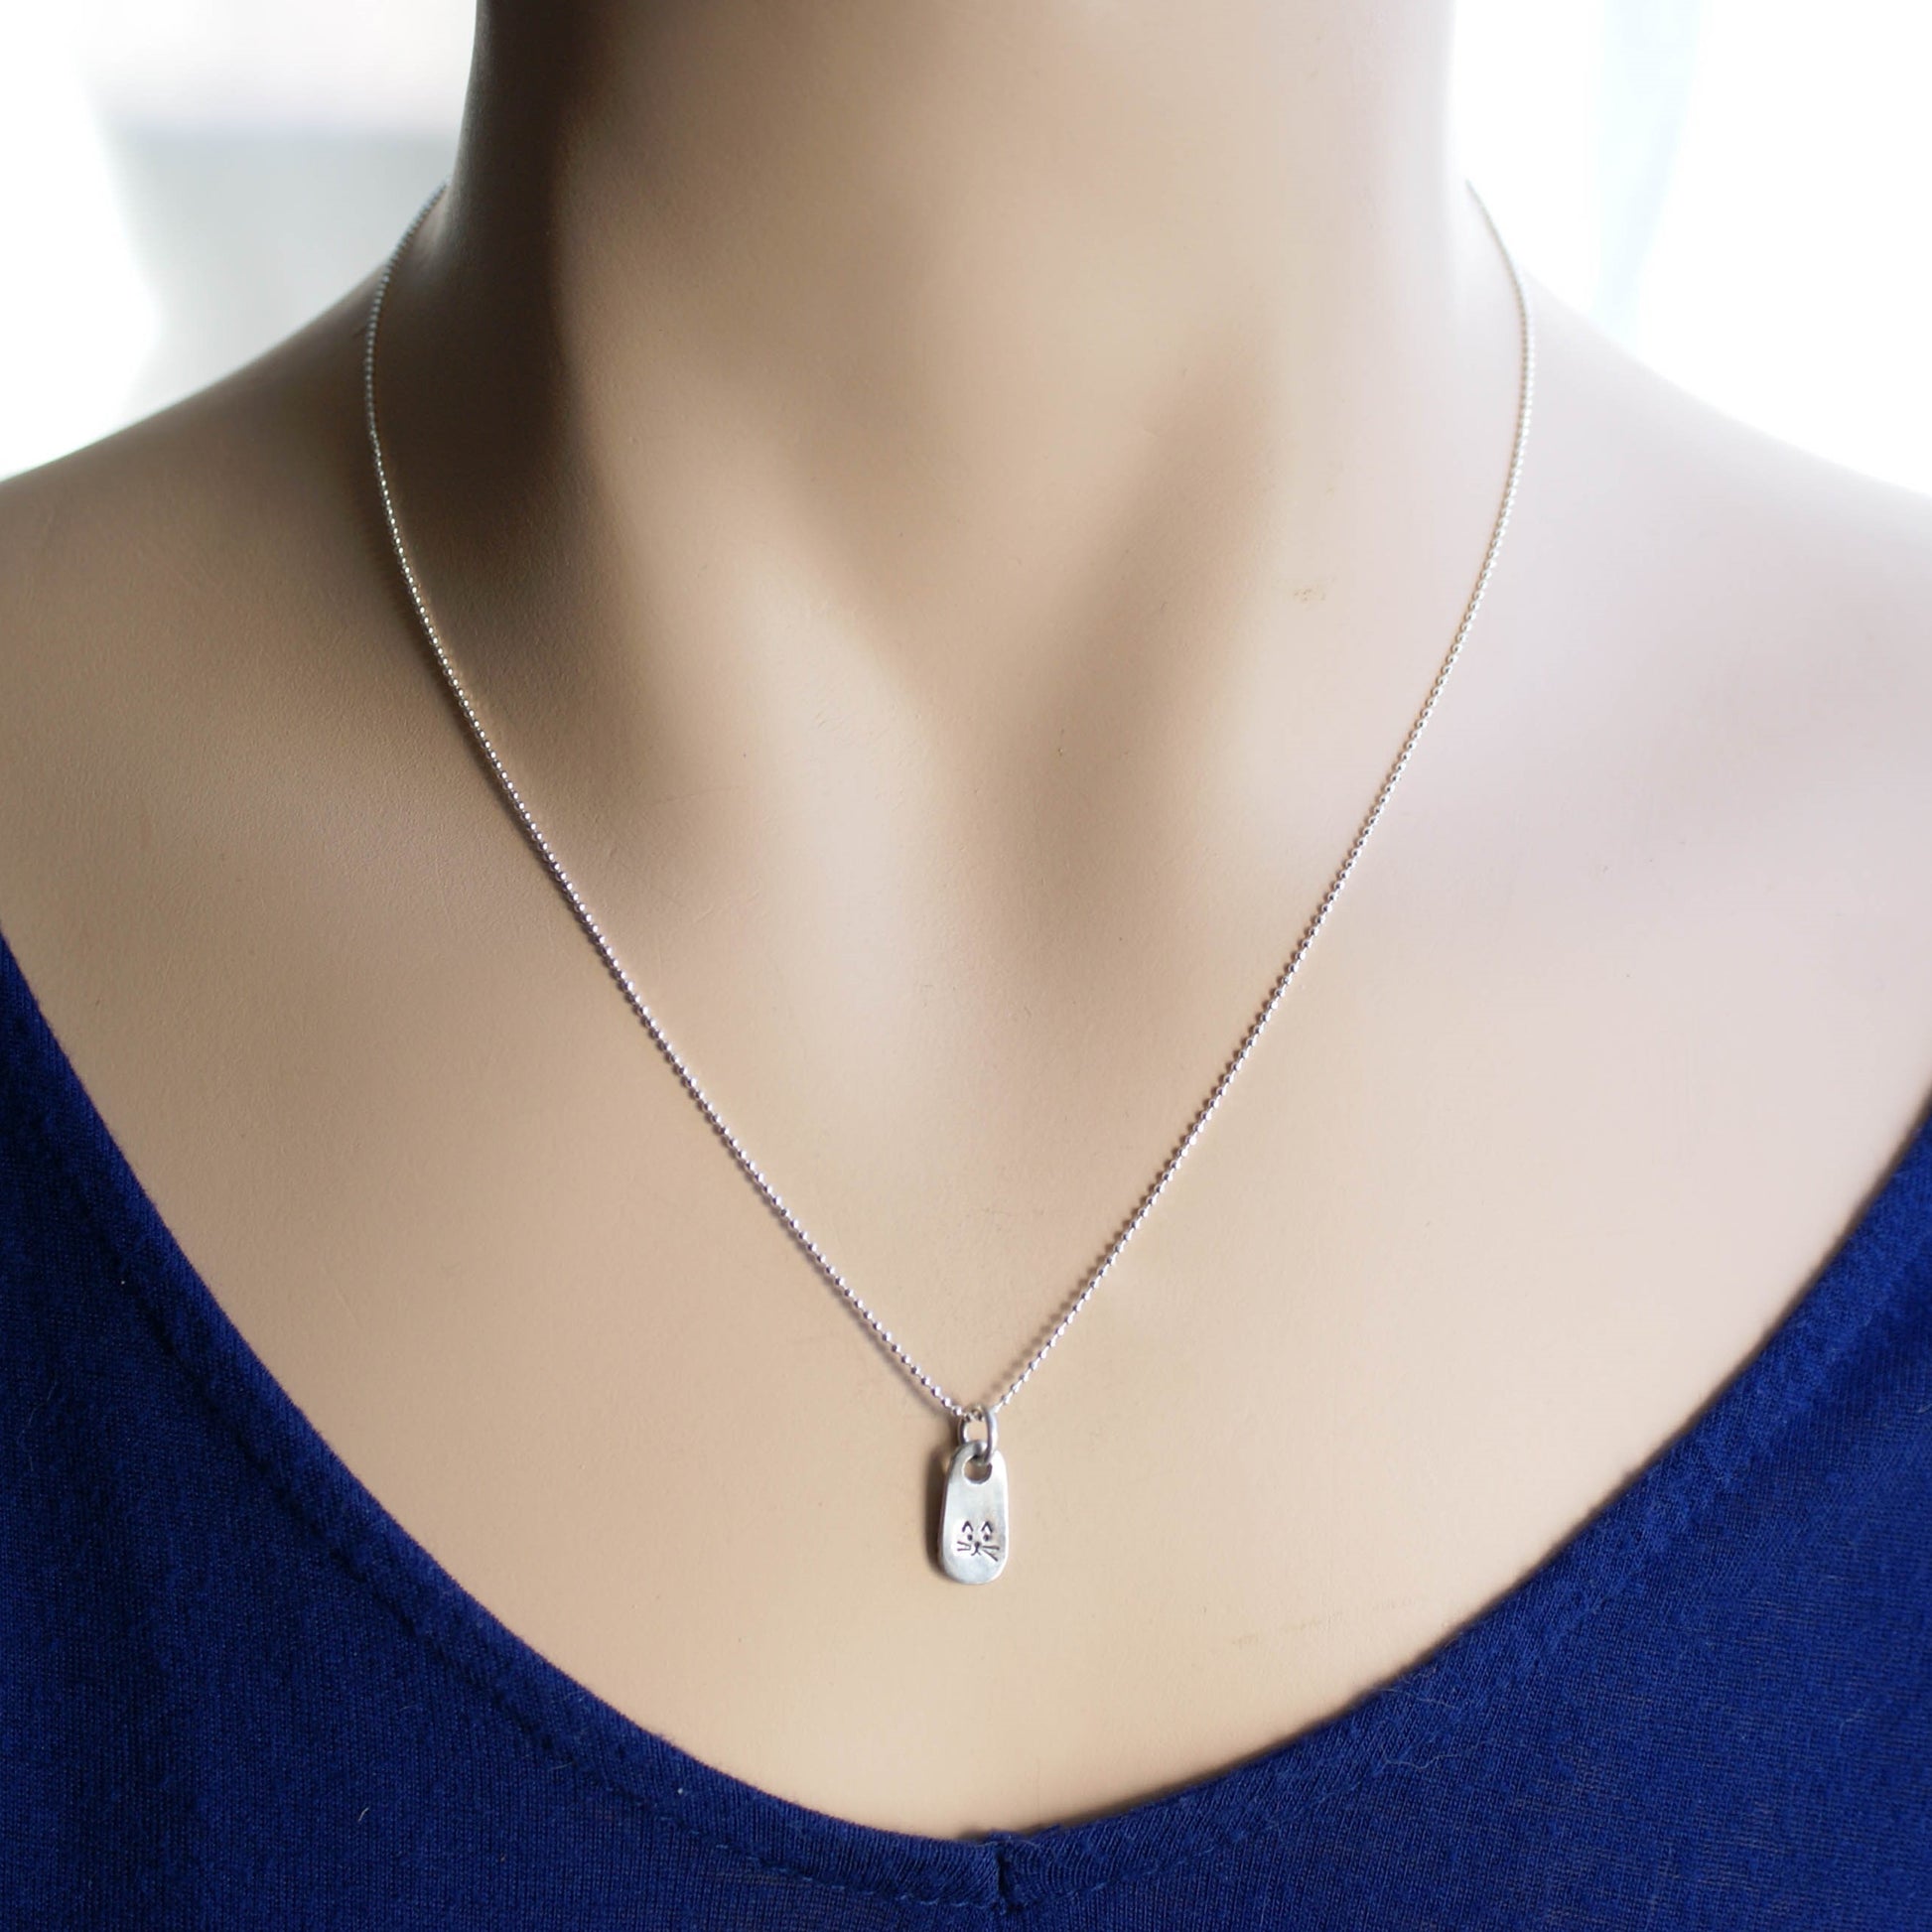 Petite Silver Necklace in Artisan Pewter with handstamped kitty face on neck